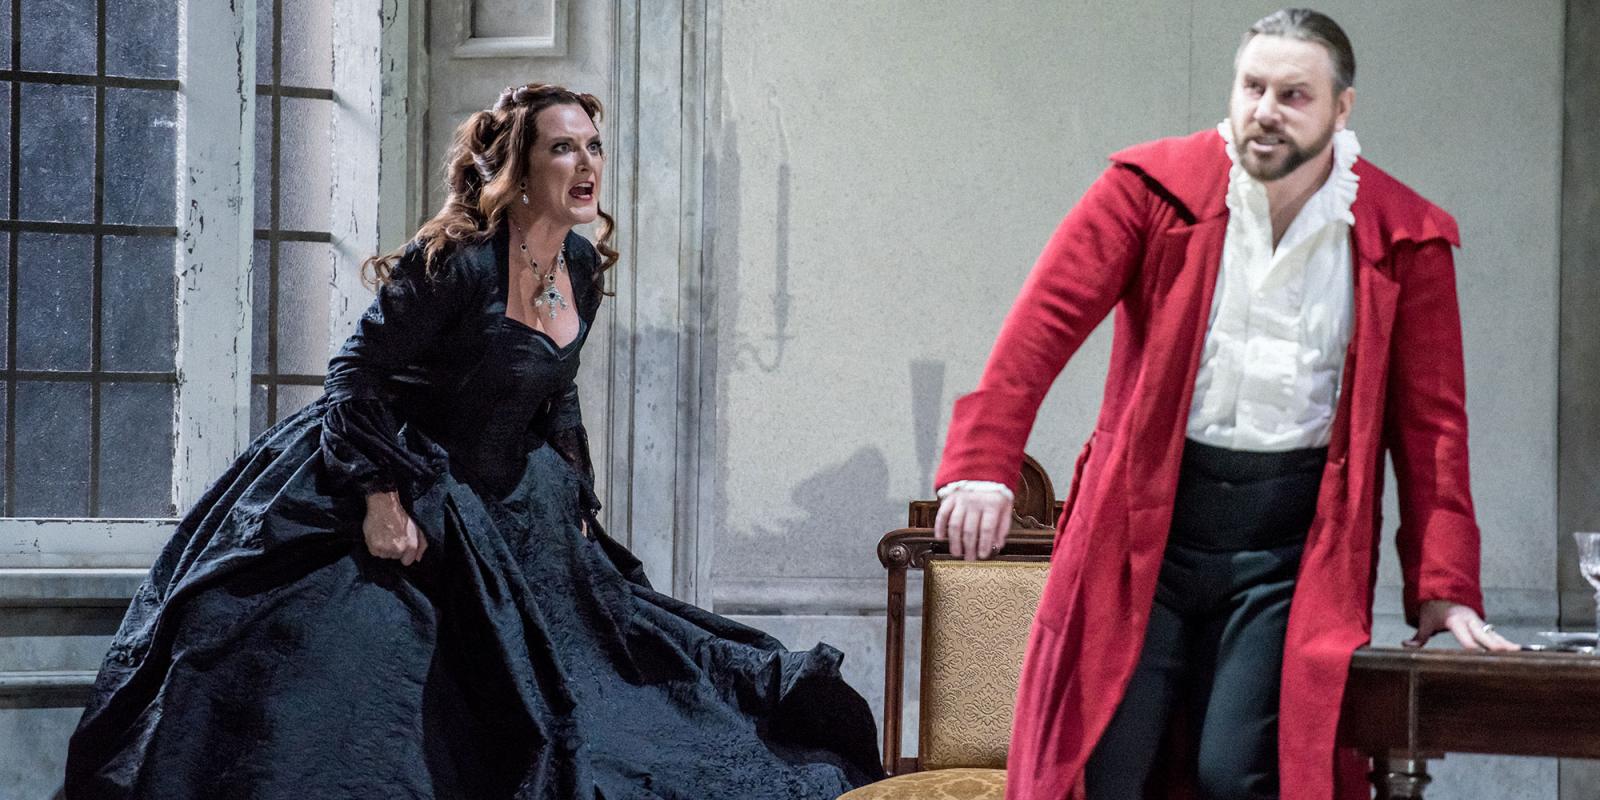 ENO2223 Tosca: Sinéad Campbell-Wallace as Tosca, Noel Bouley as Scarpia © Genevieve Girling